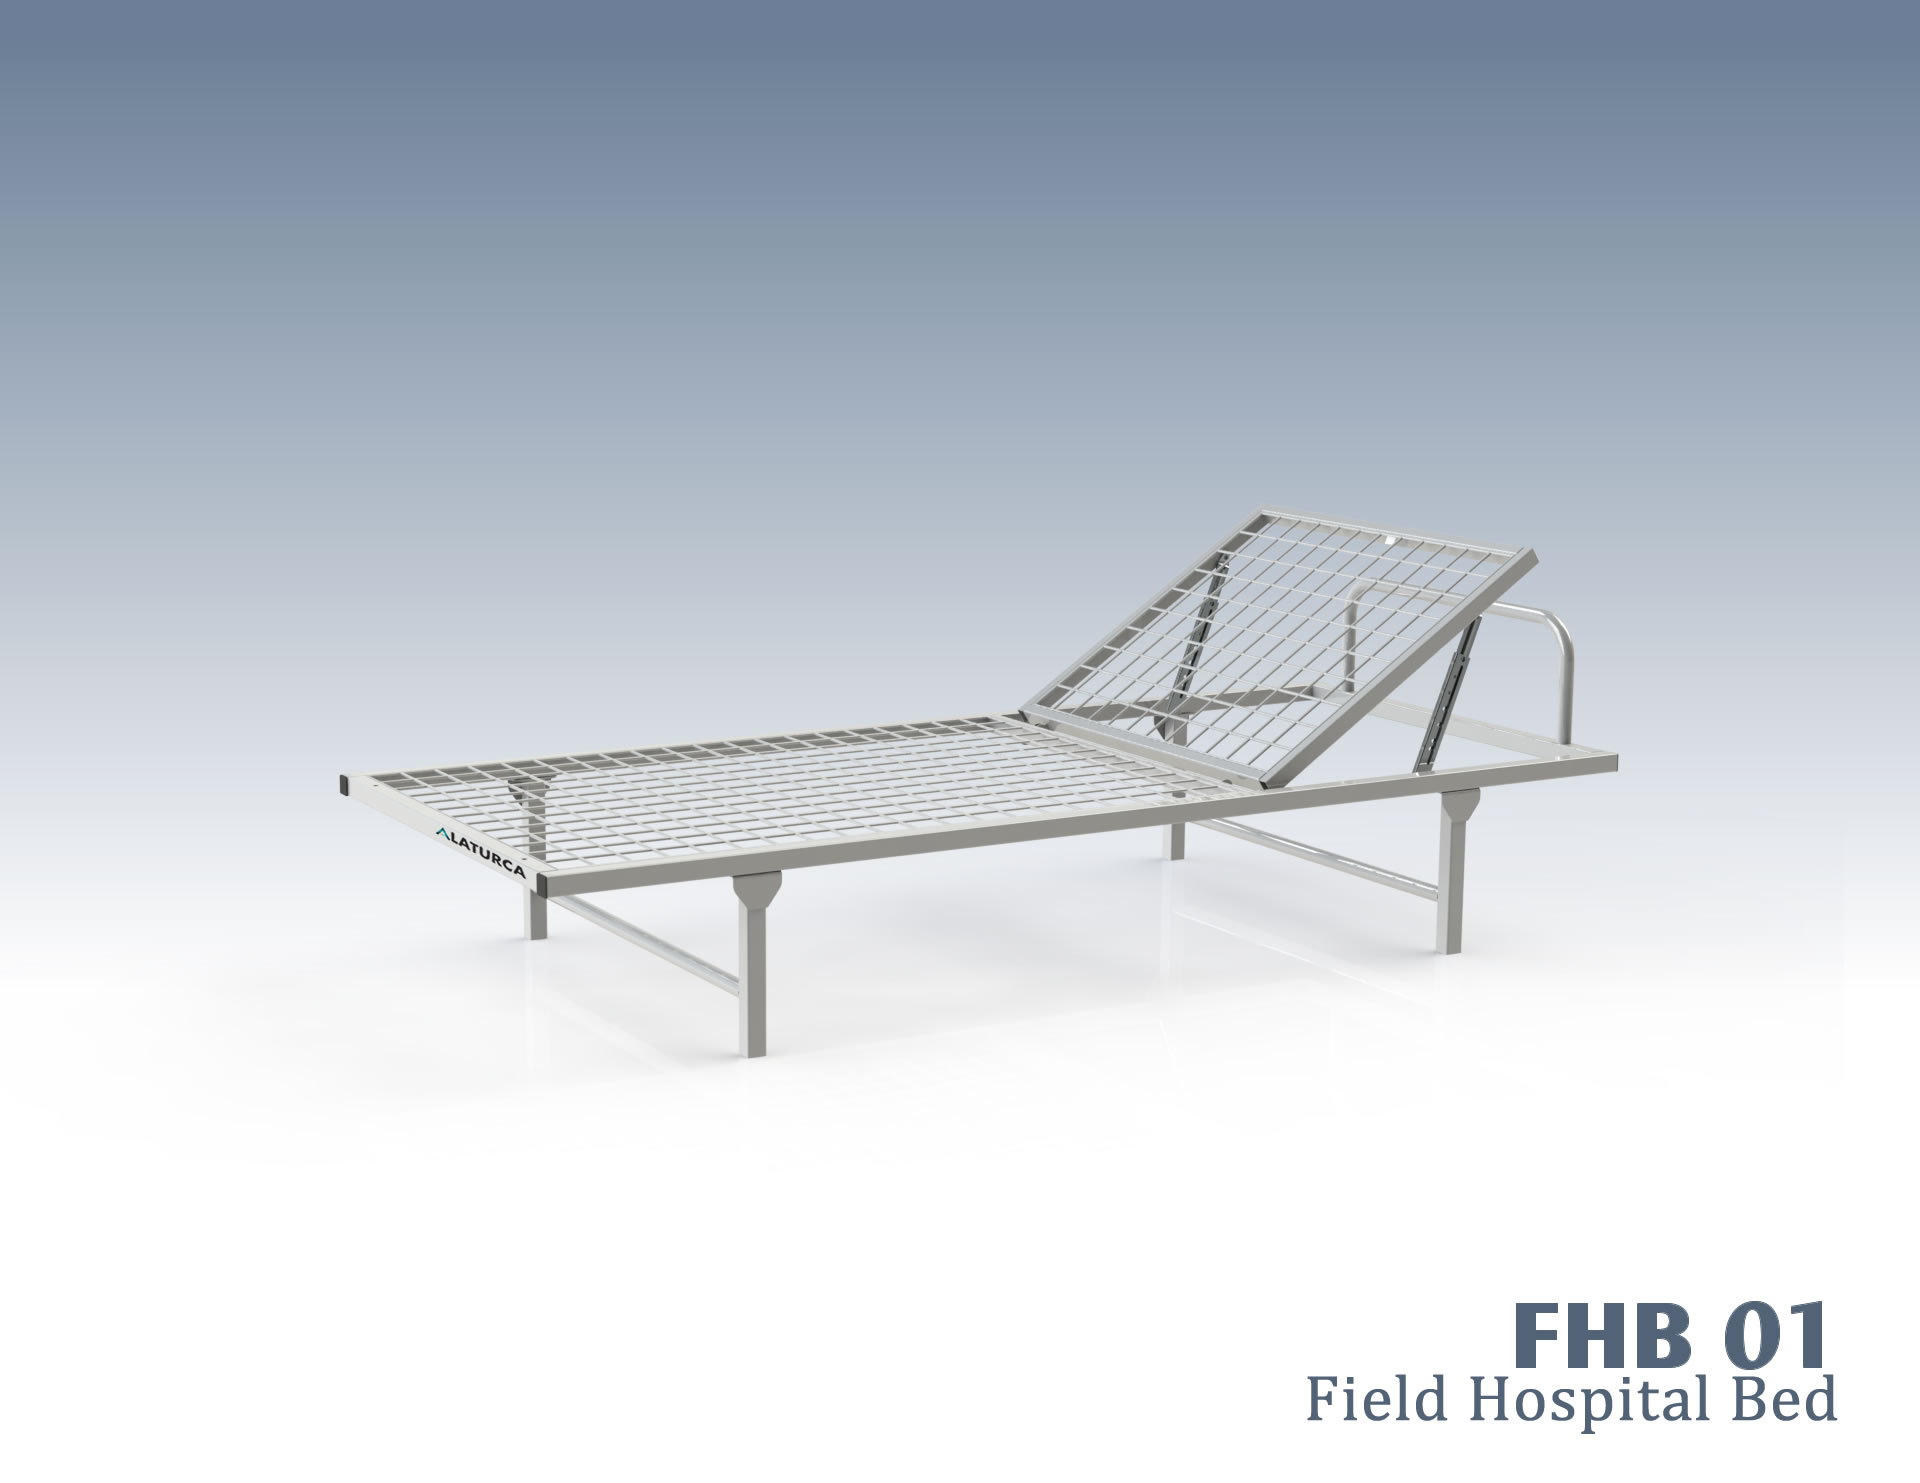 FHB 01 - FIELD HOSPITAL BED